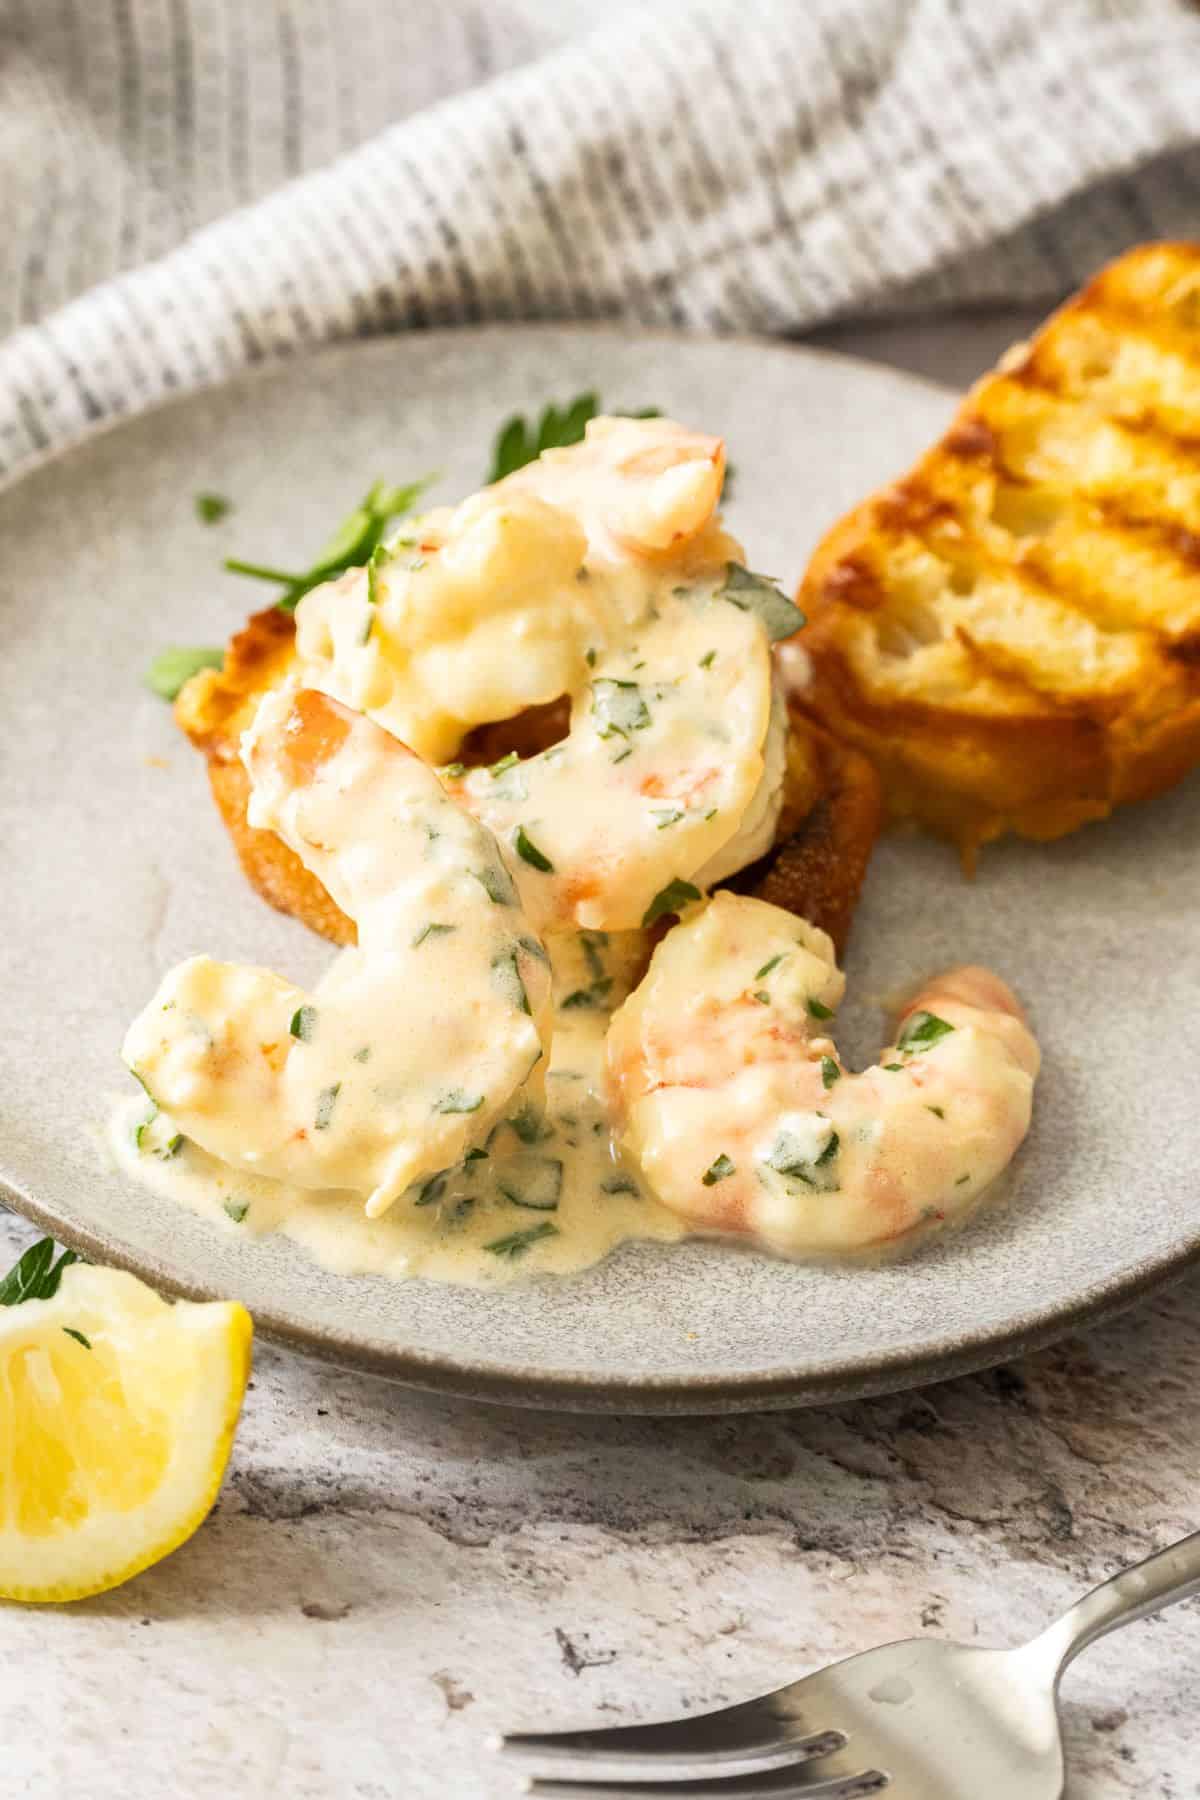 Serving of Creamy Lemon Garlic Prawns on a round grey plate with two pieces of grilled bread.